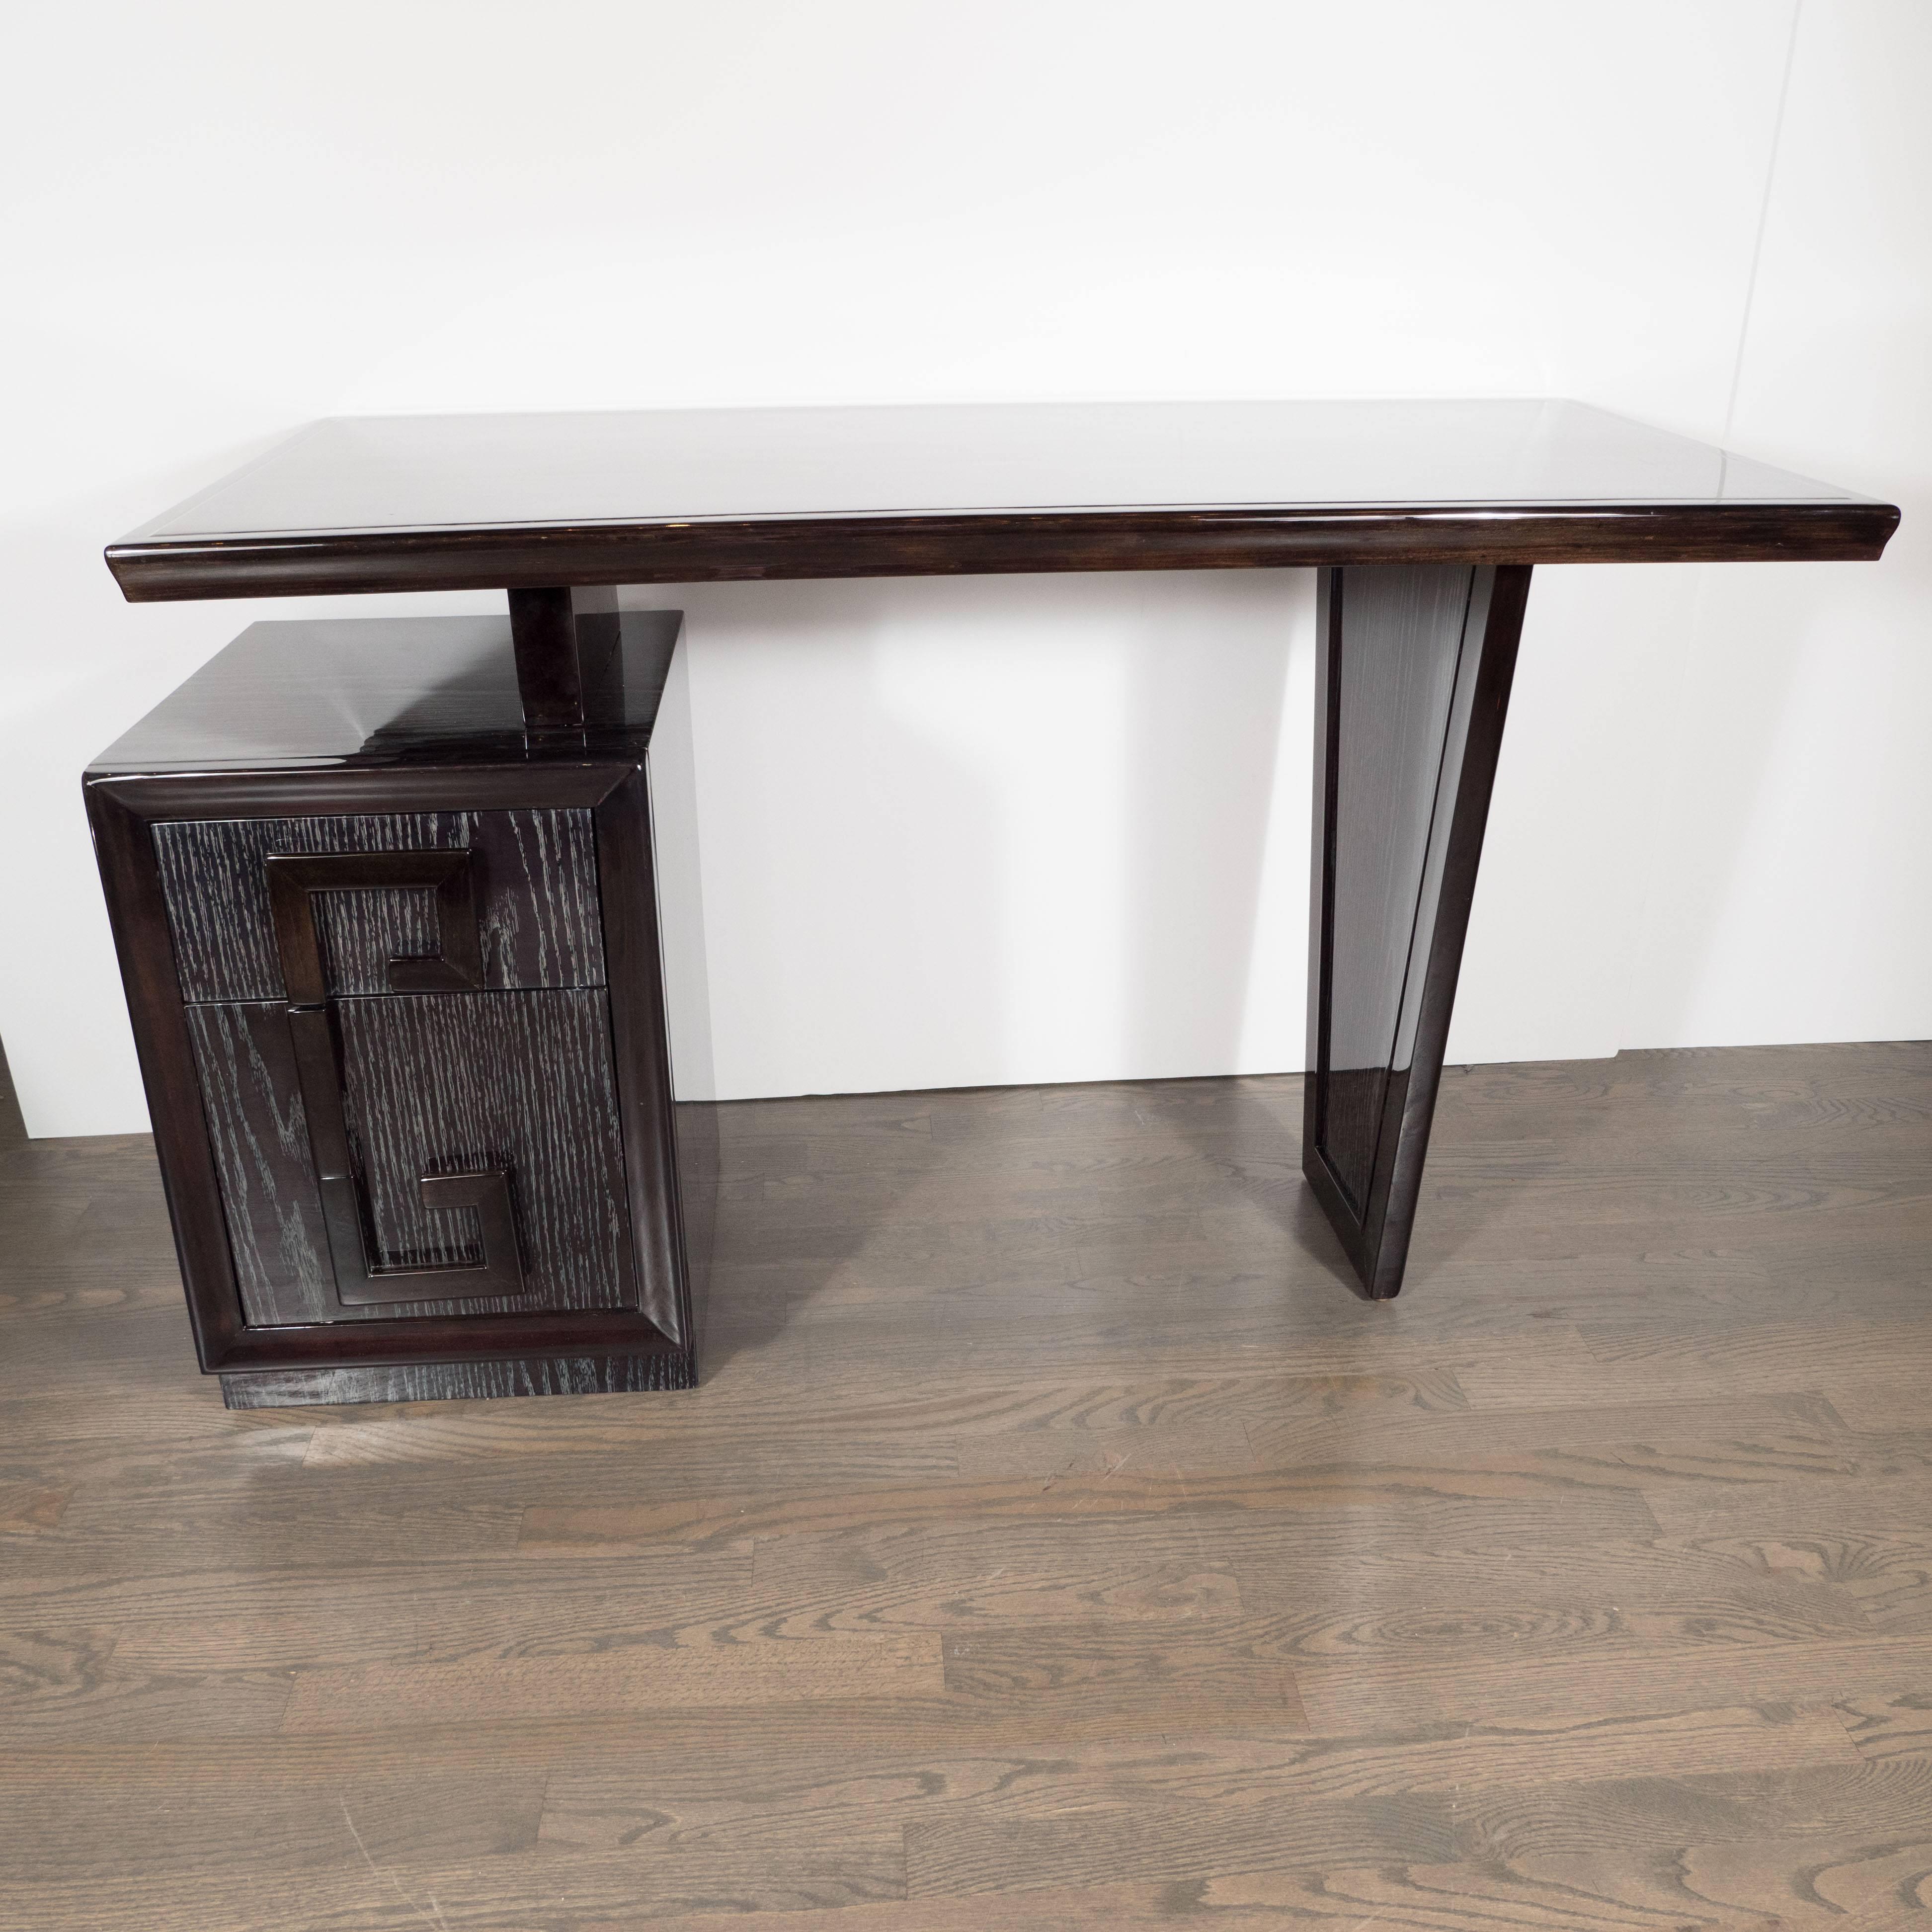 This stylish silver cerused oak desk was realized by the esteemed American maker, Kittenger, circa 1950- the same company responsible for supplying furniture to the white house from the Nixon administration to Obama. The superlative construction and